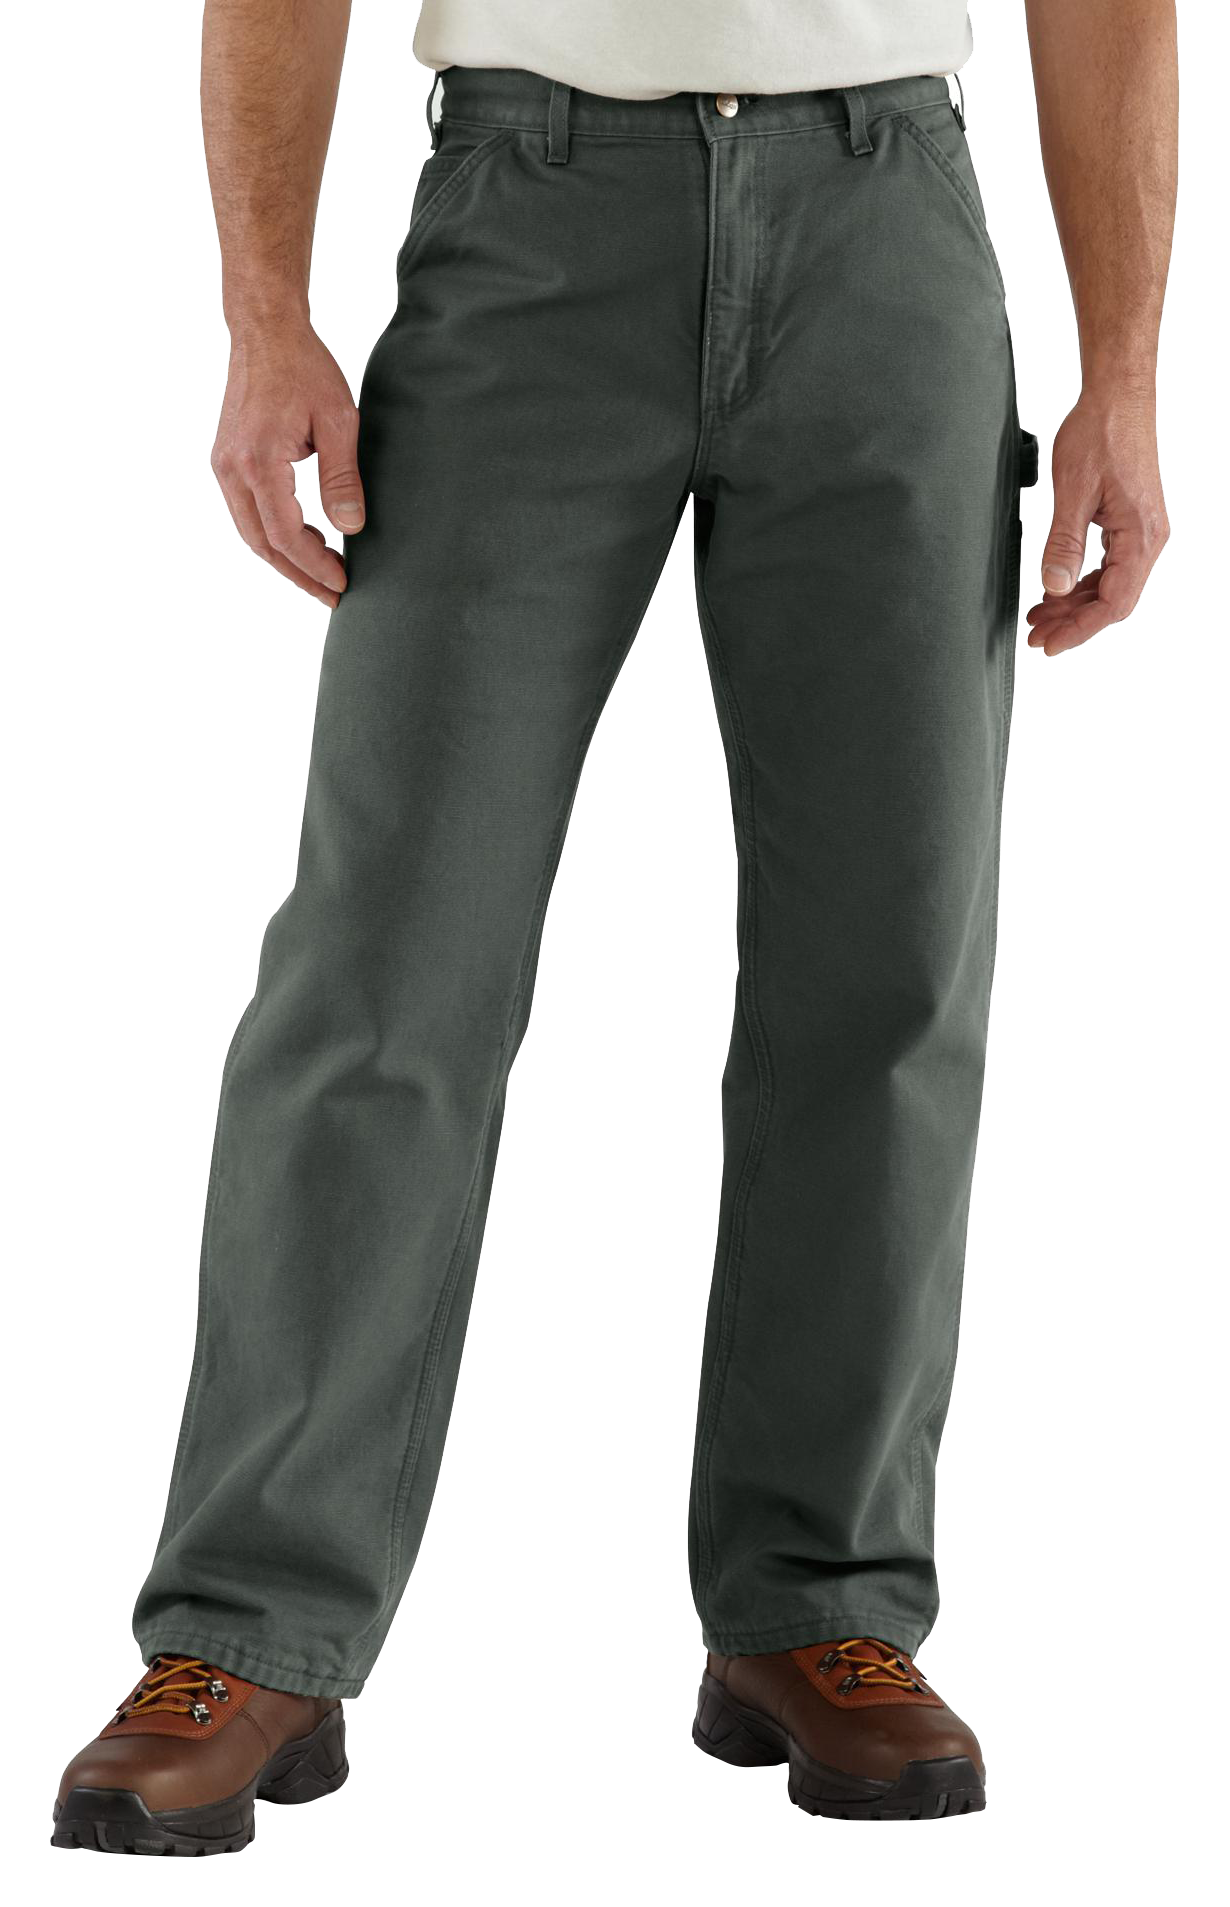 Carhartt Loose-Fit Washed Duck Utility Work Pants for Men - Moss - 33x34